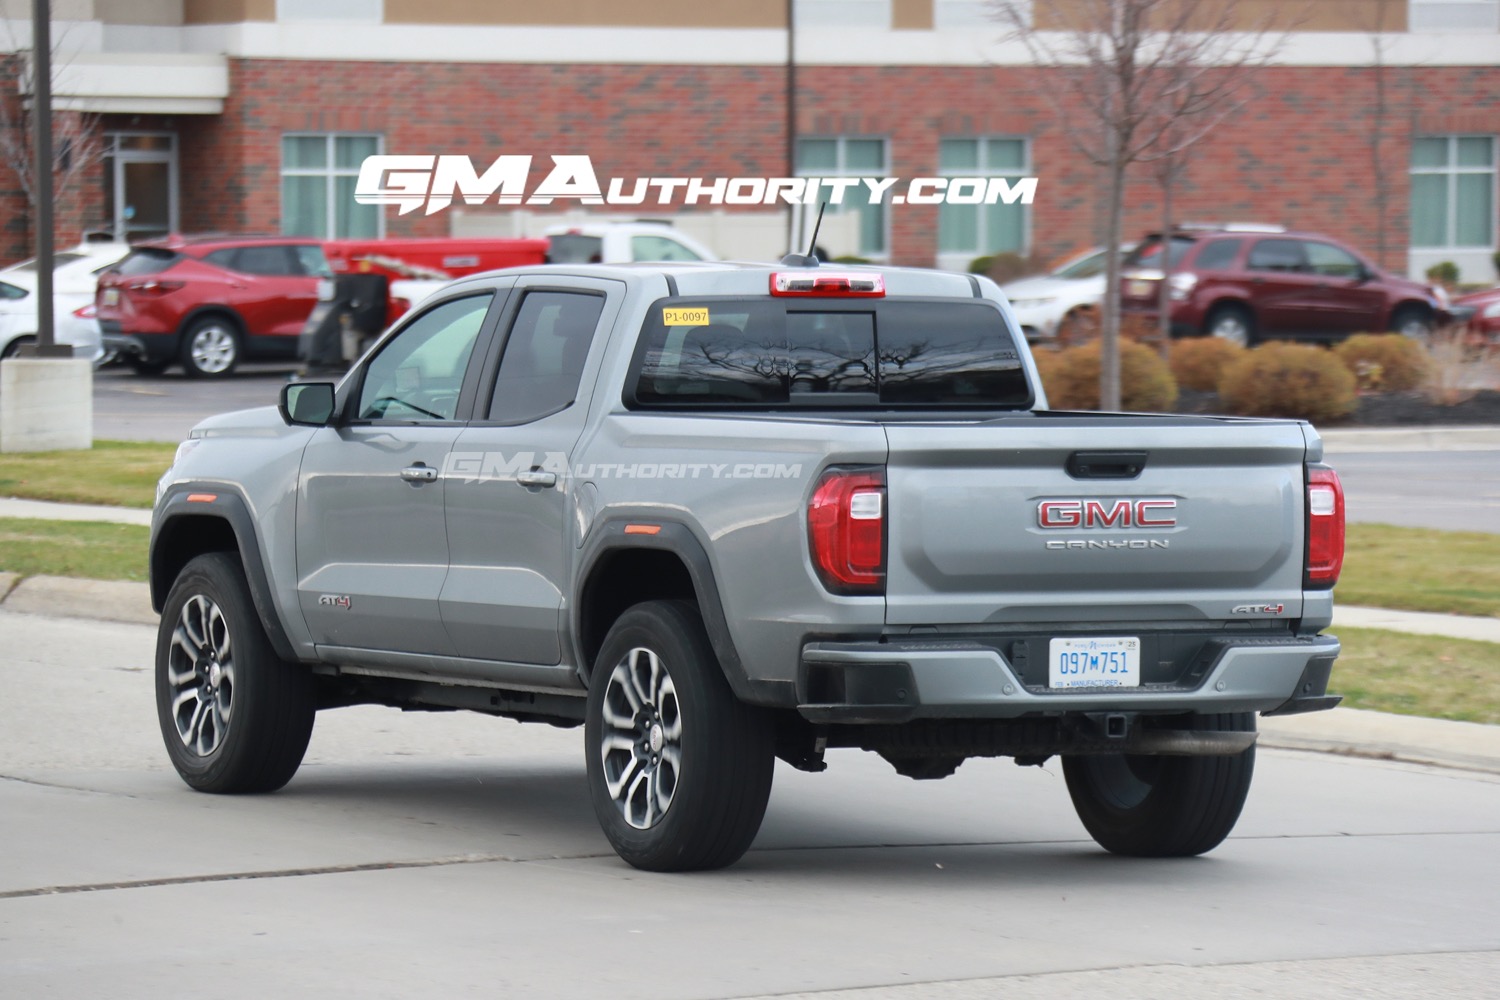 2023-gmc-canyon-at4-sterling-metallic-gxd-20-inch-wheels-rd5-real-world-photos-exterior3-chevrolet-colorado-trail-boss-sterling-gray-metallic-gxd-first-real-world-photos-exterior-009